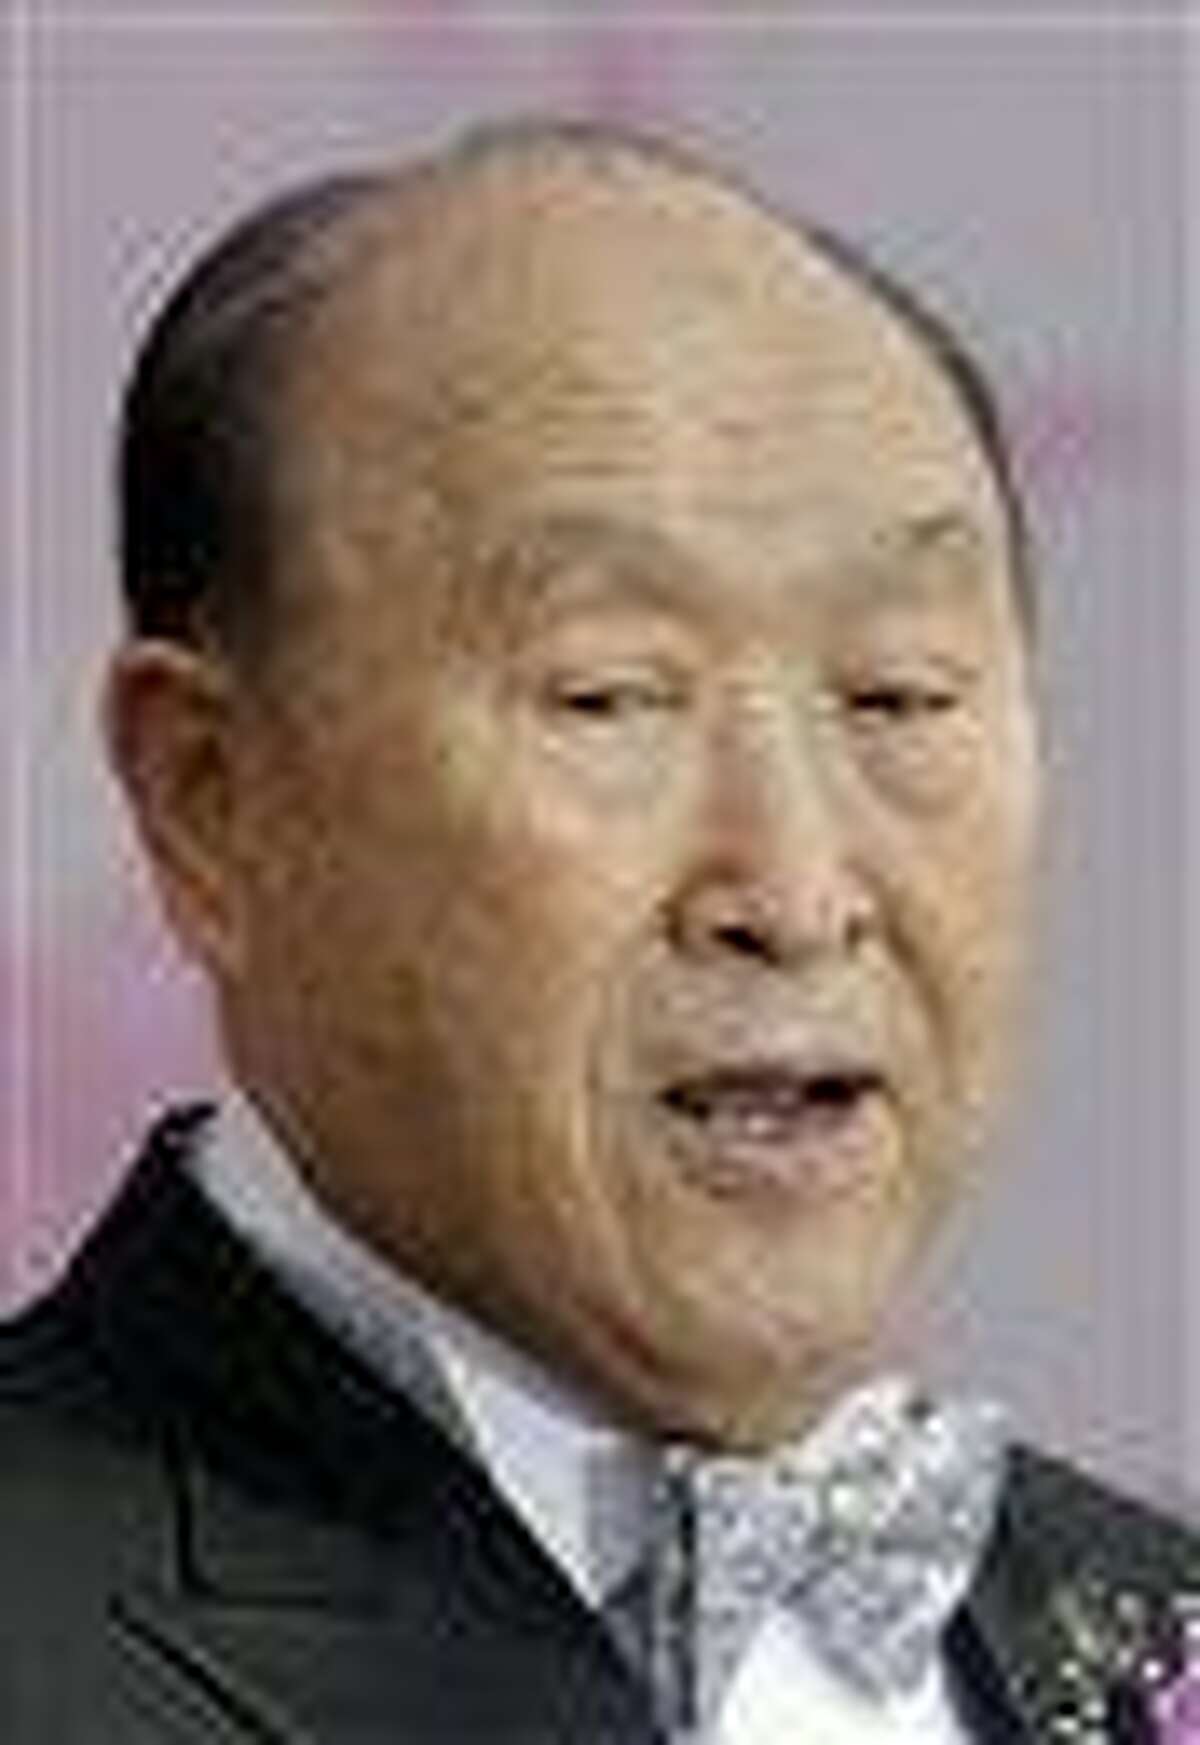 Unification Church Founder Sun Myung Moon Dies At 92 Mass Weddings Are Part Of His Legacy